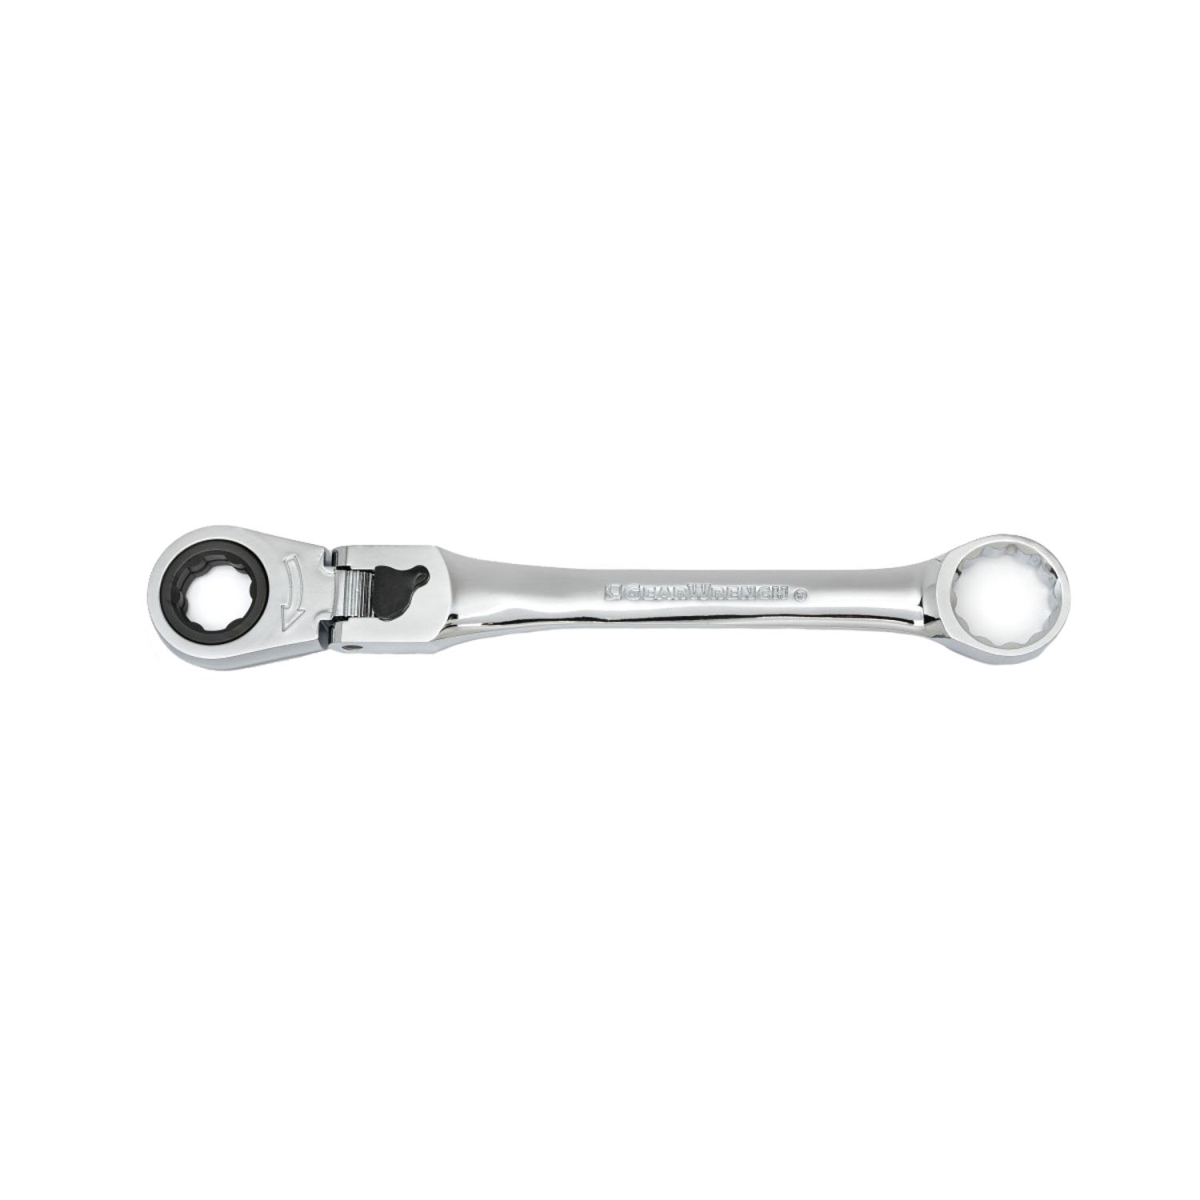 5 Position Locking Flex Head Ratcheting Wrench -  OPEN HOUSE, OP1816810